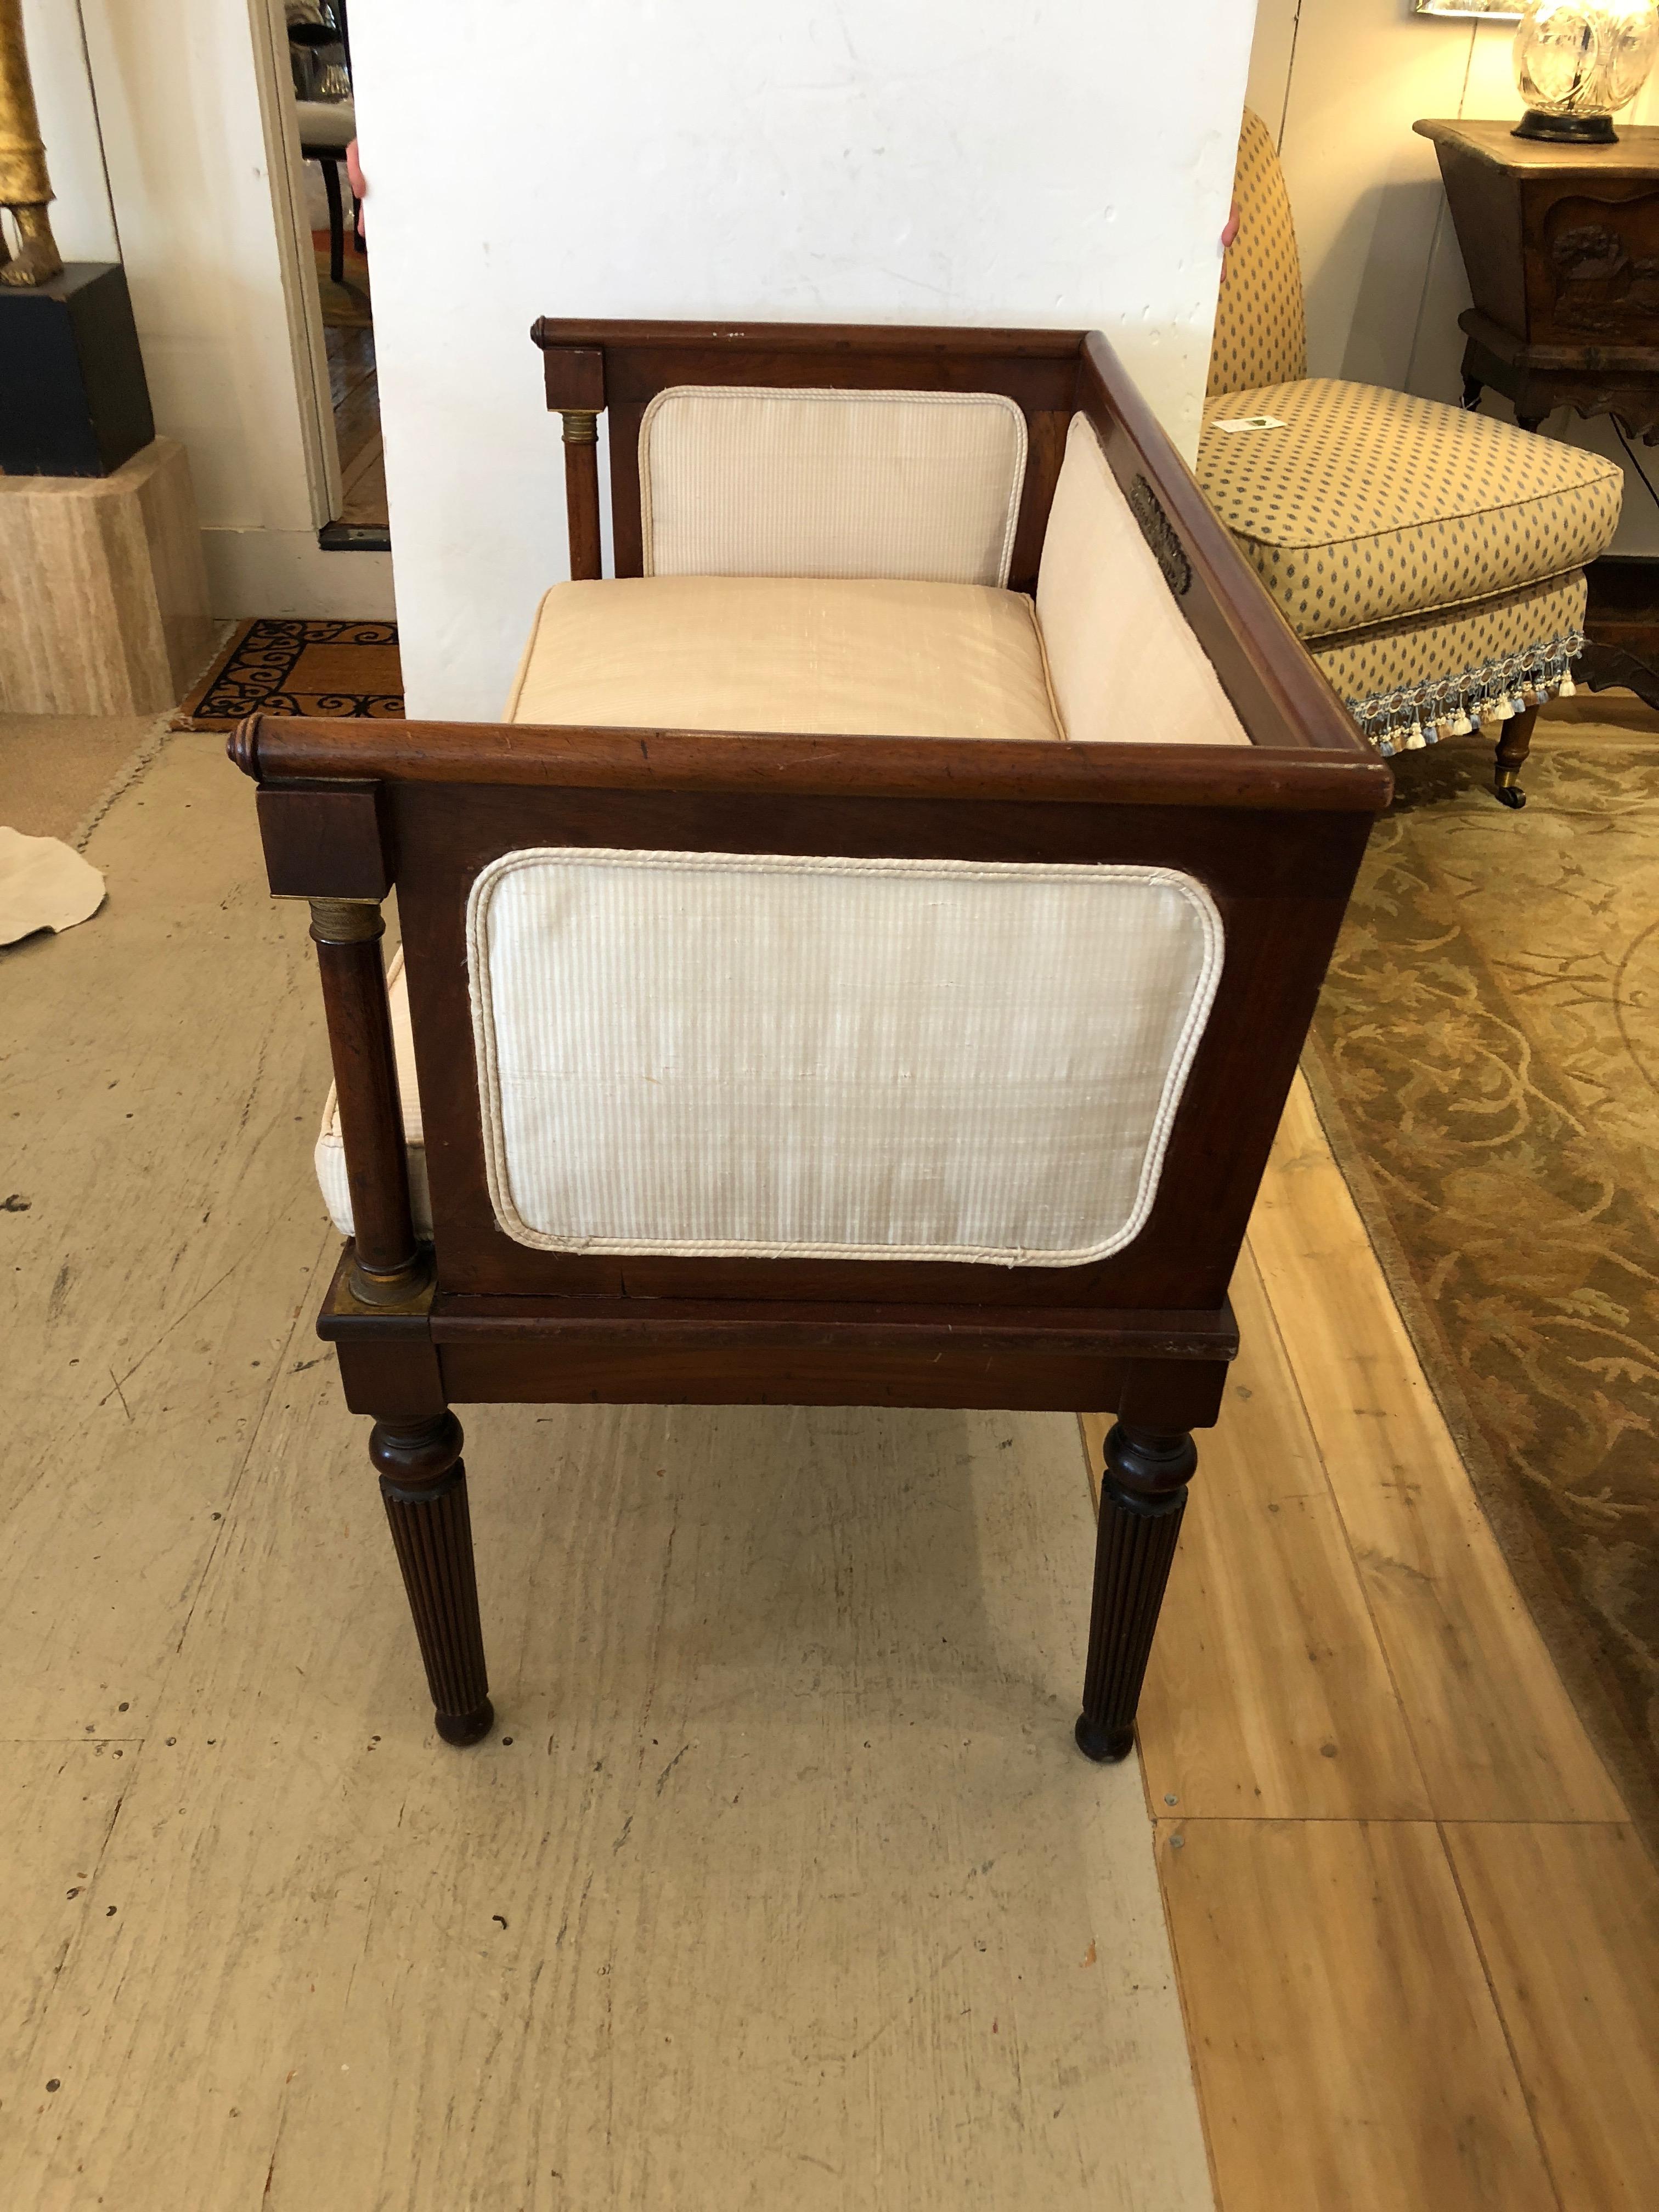 Lovely French Regency settee having upholstered frame and removable down seat cushion, pretty walnut colored mahogany frame with reeded legs and decorative brass on the top of the back and arms.